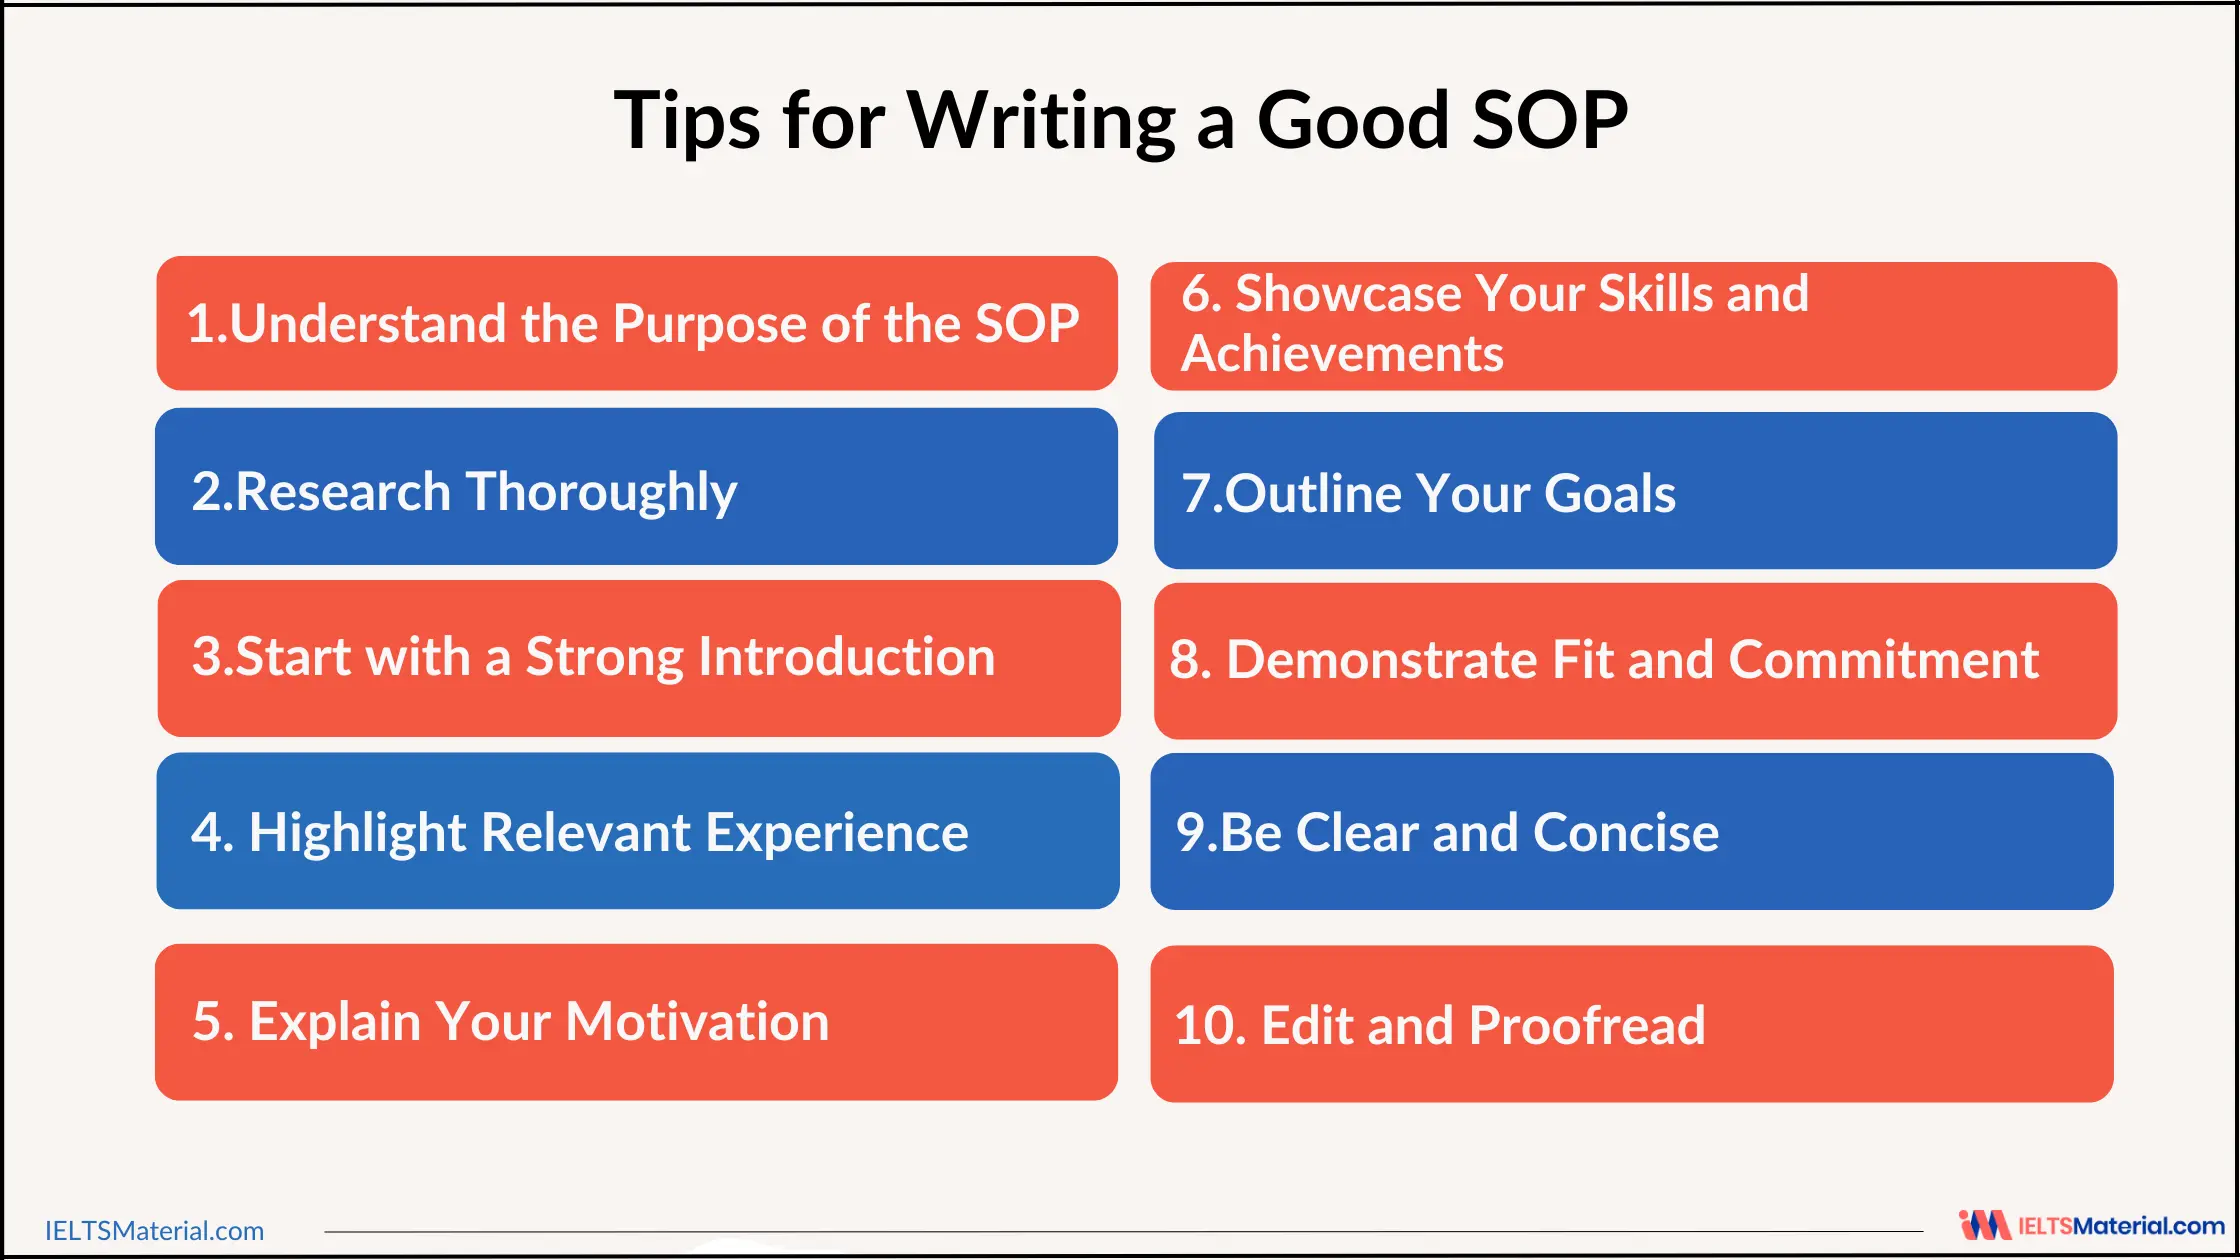 Tips for Writing a Goof SOP